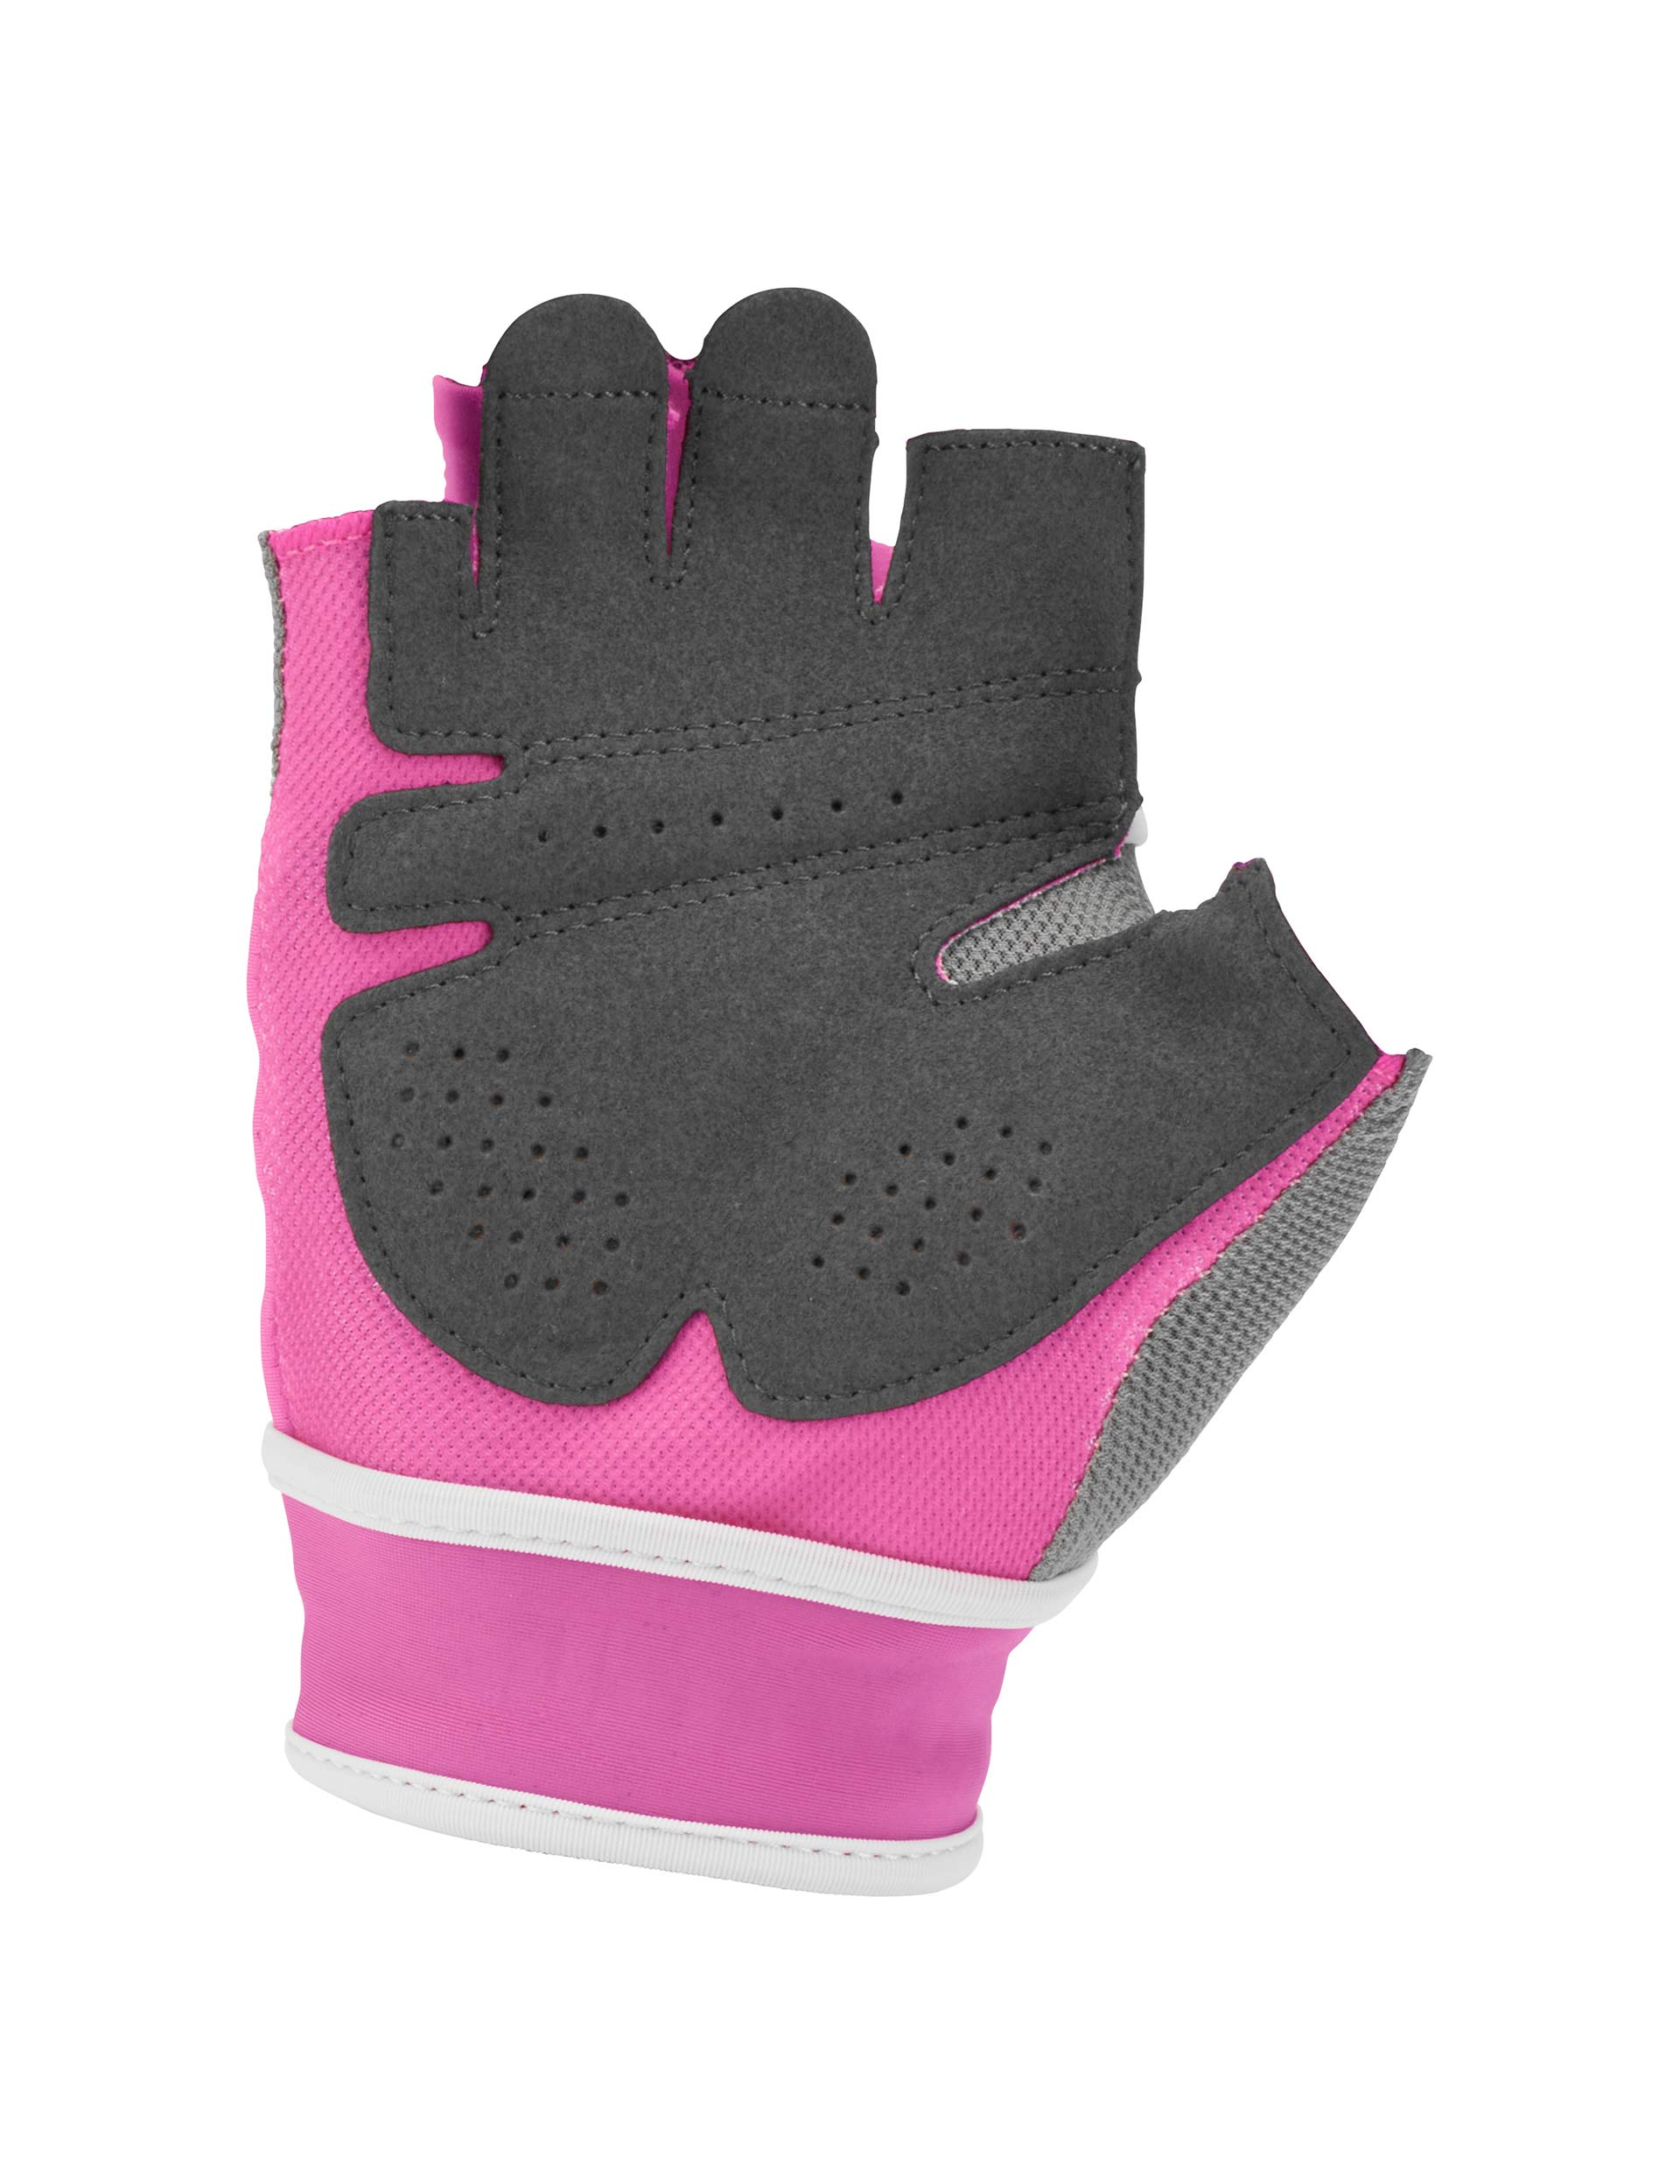 verlangen Begraafplaats Eik 10 weight lifting gloves to prevent calluses & protect your palms